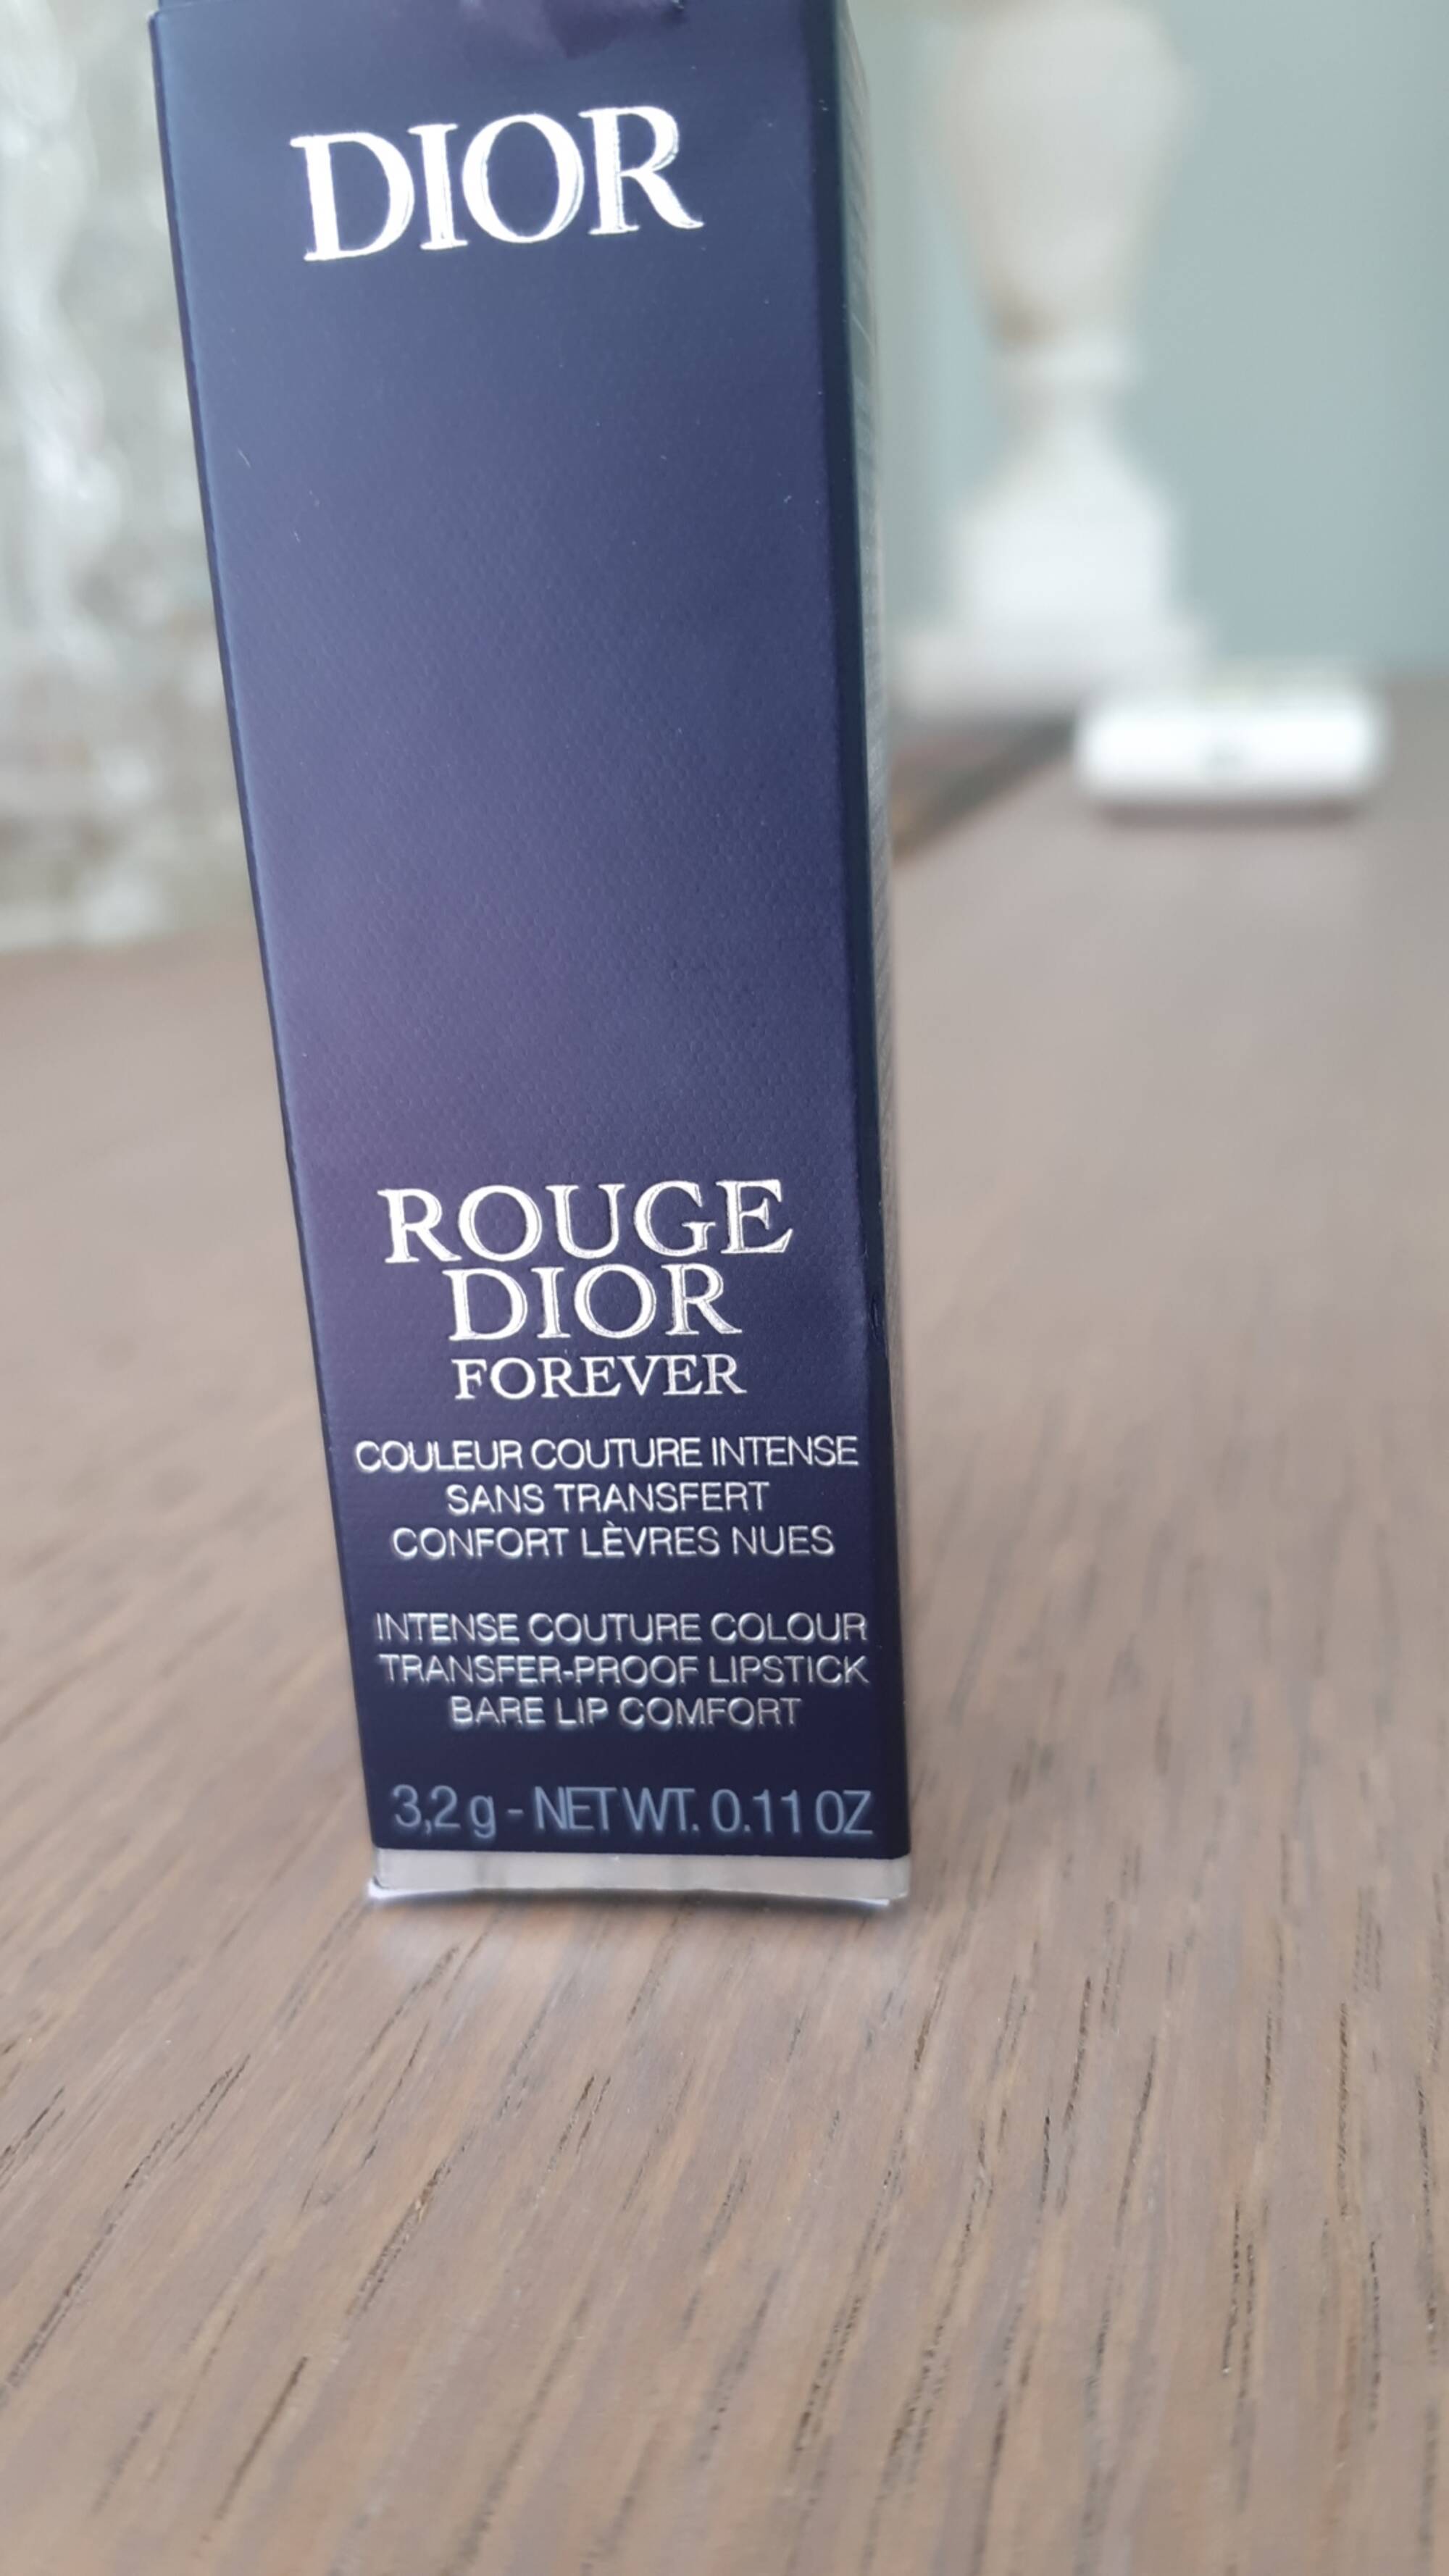 DIOR - Rouge Dior forever